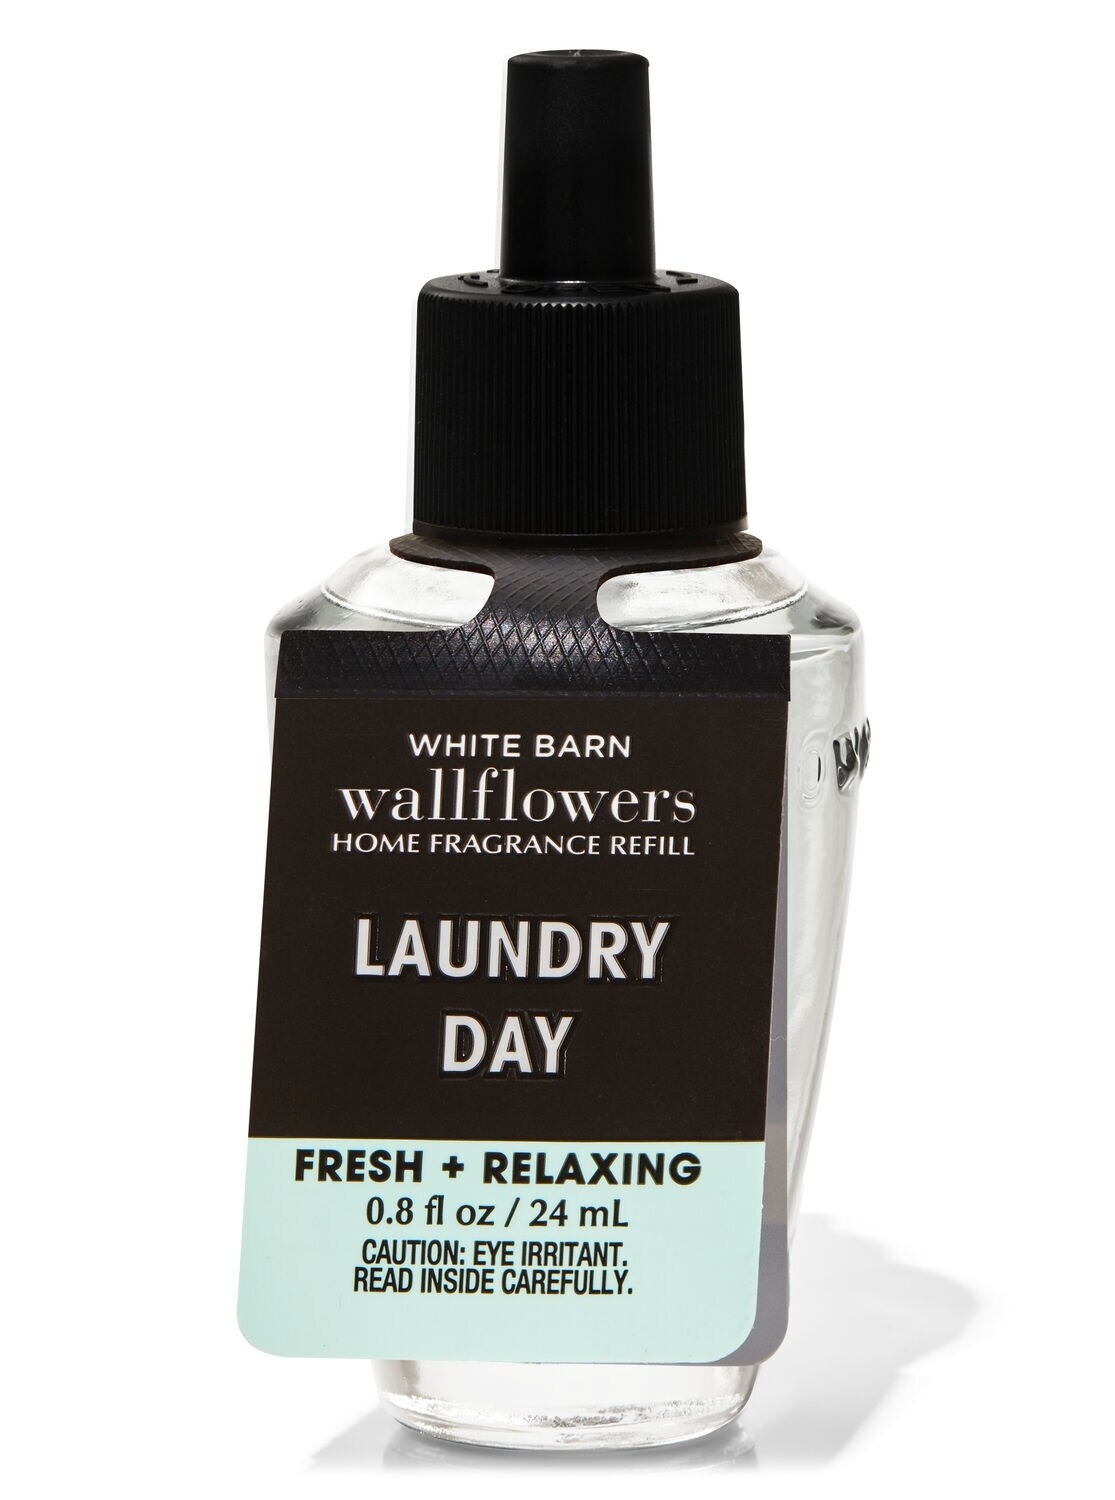 Bath and body works wallflower refill- Laundry day 